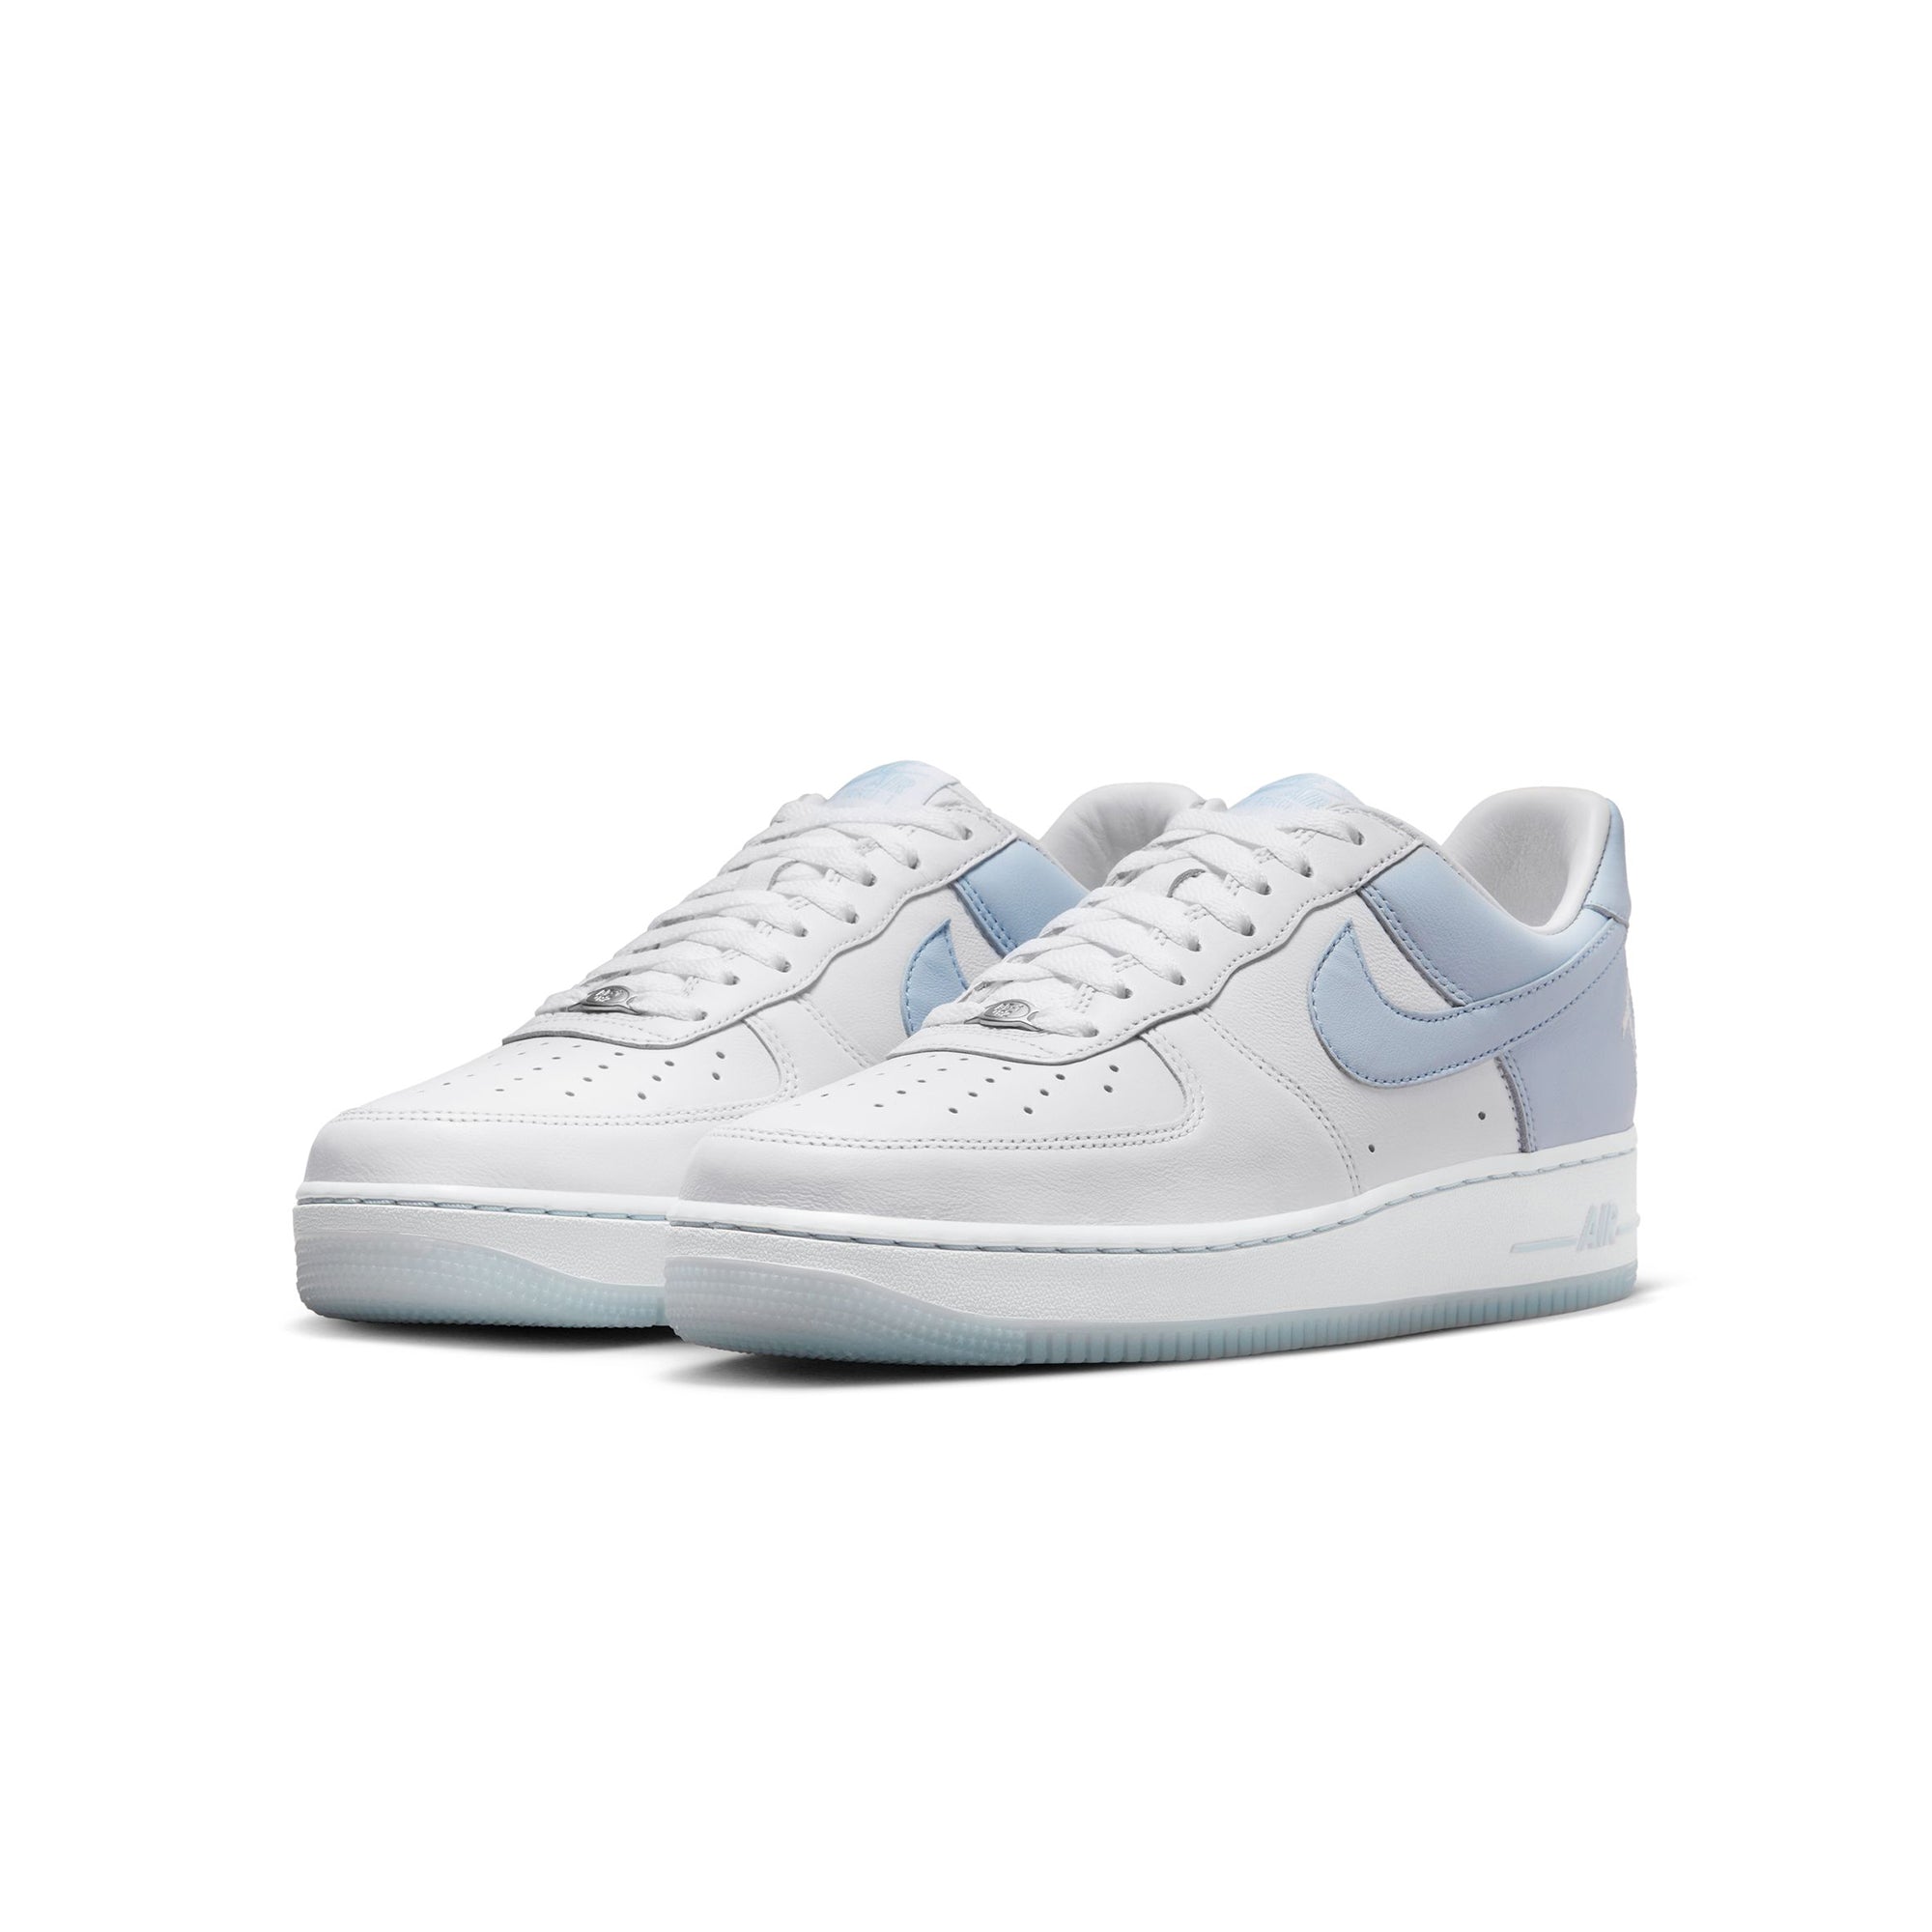 Up to 60% Off Nike Air Force 1 Shoes for the Family w/ Prices from